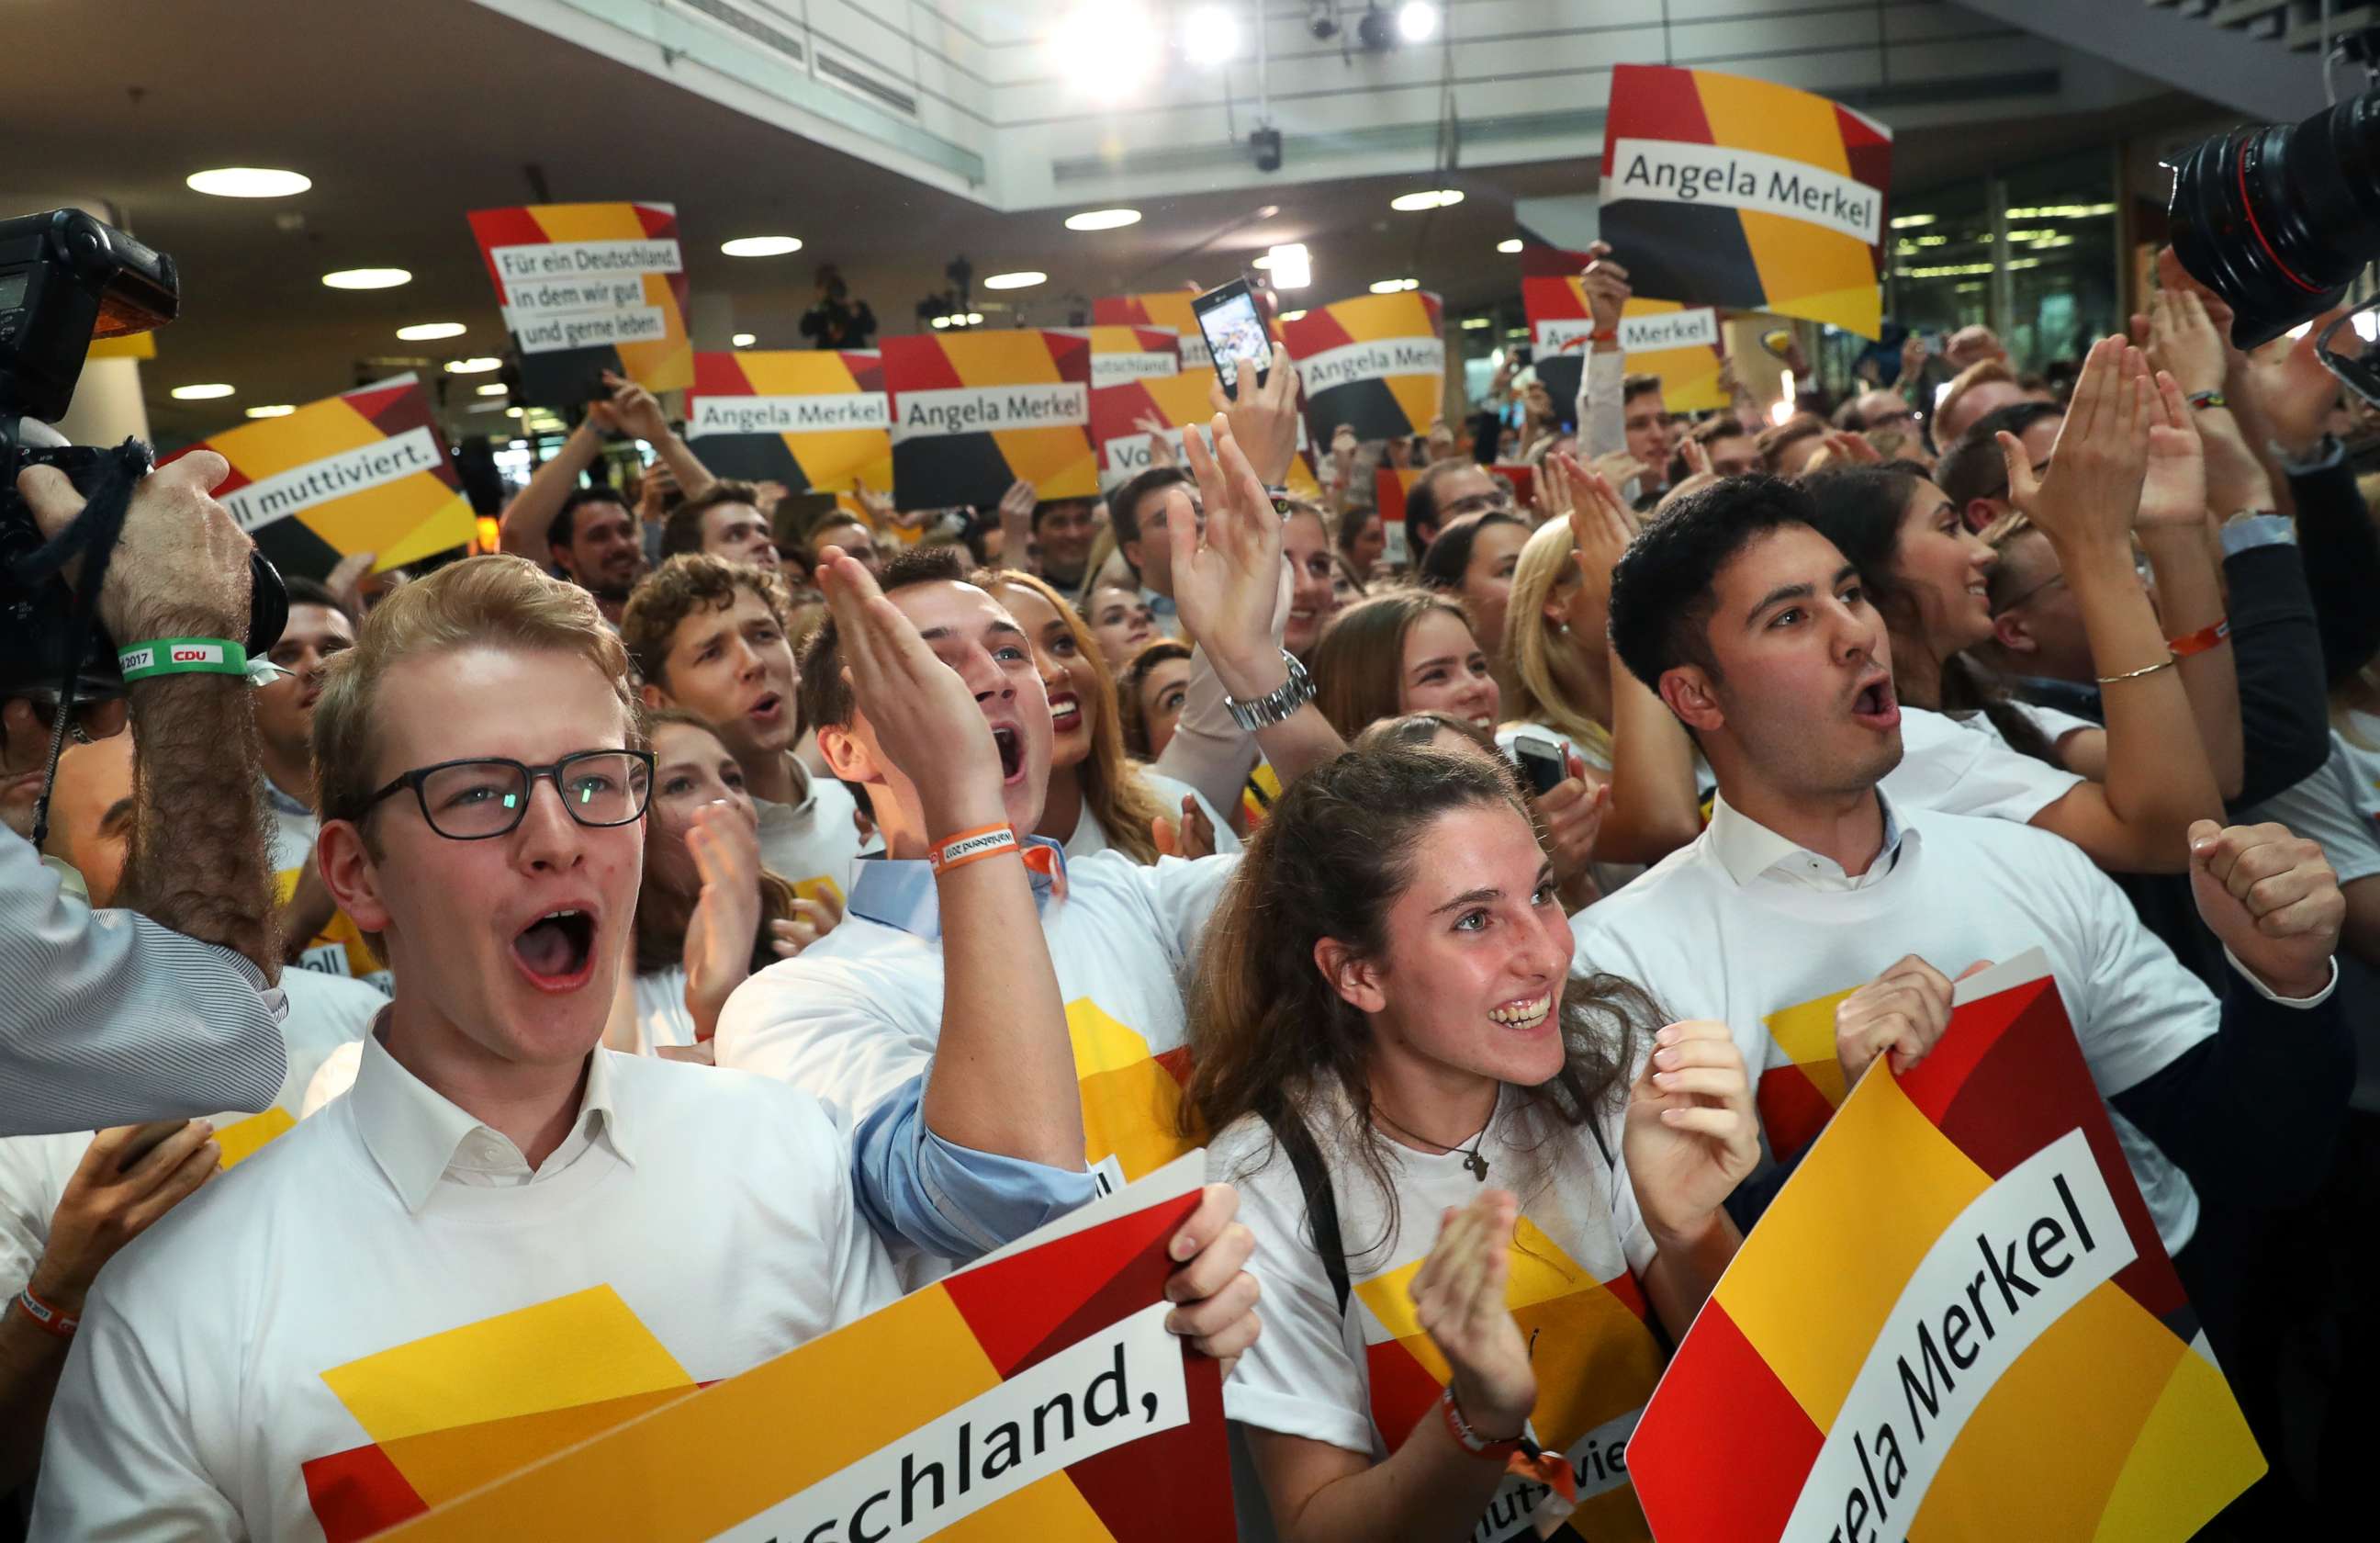 PHOTO: Supporters of the German Christian Democrats (CDU), the party of German Chancellor Angela Merkel, cheer while waiting for the initial results in German federal elections, Sept. 24, 2017 in Berlin, Germany. 